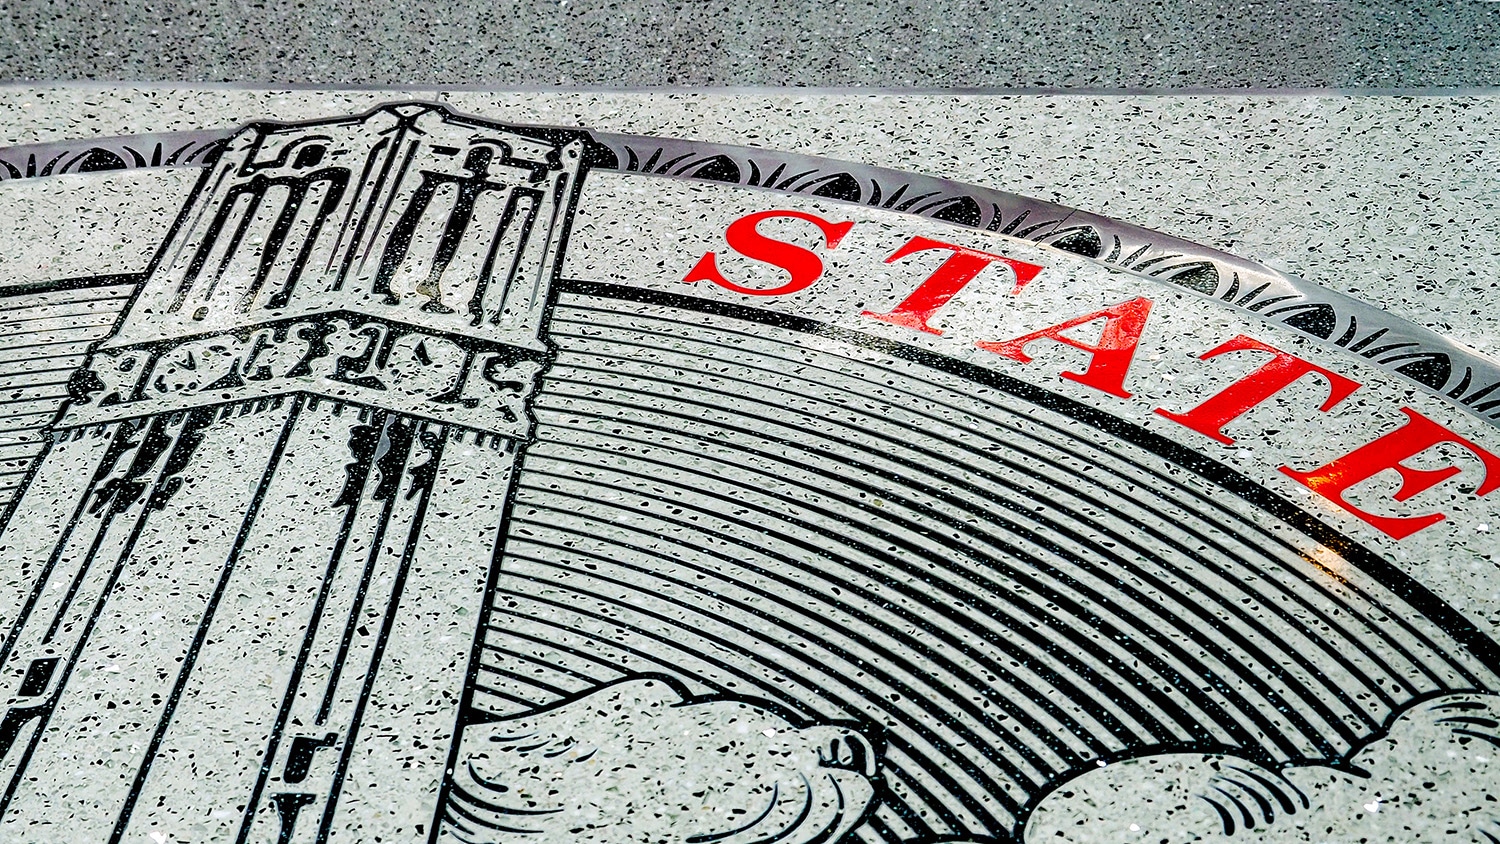 Close up of university seal on the floor of the Talley Student Union.